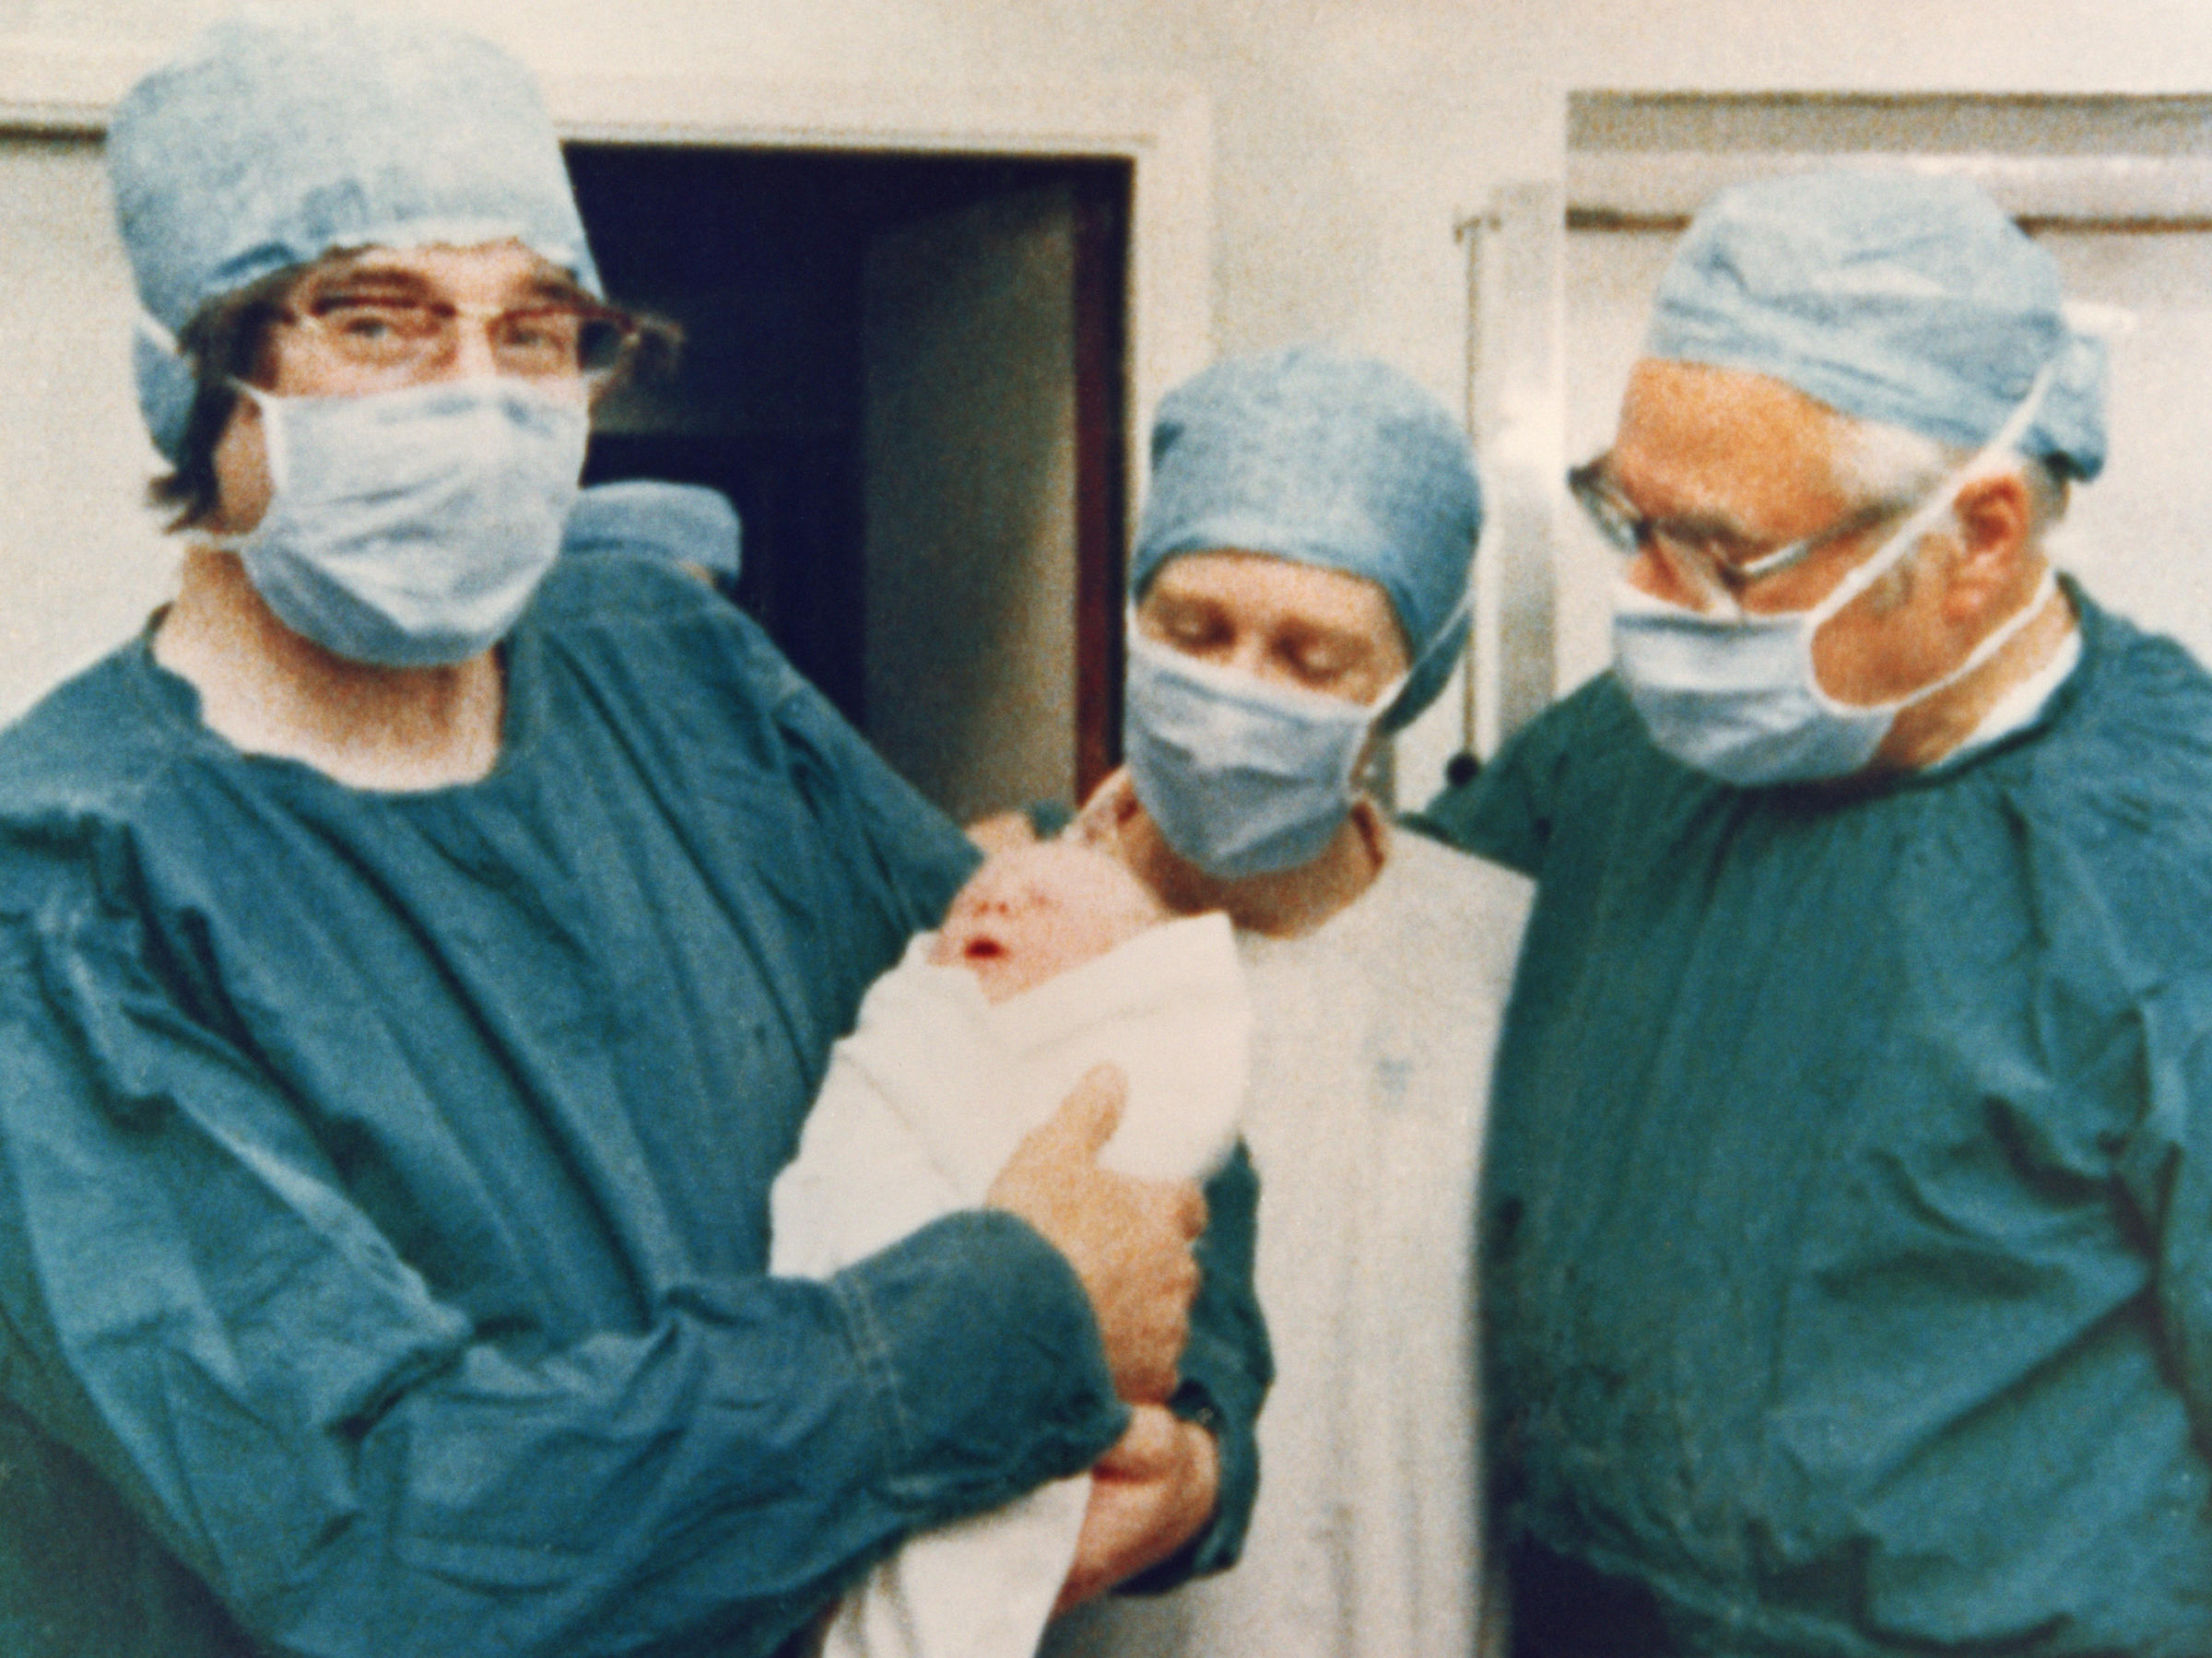 Dr. Robert Edwards holds the world's first "test-tube baby," Louise Brown, on July 25, 1978. A midwife stands in the center, with gynecologist Patrick Steptoe on the right.